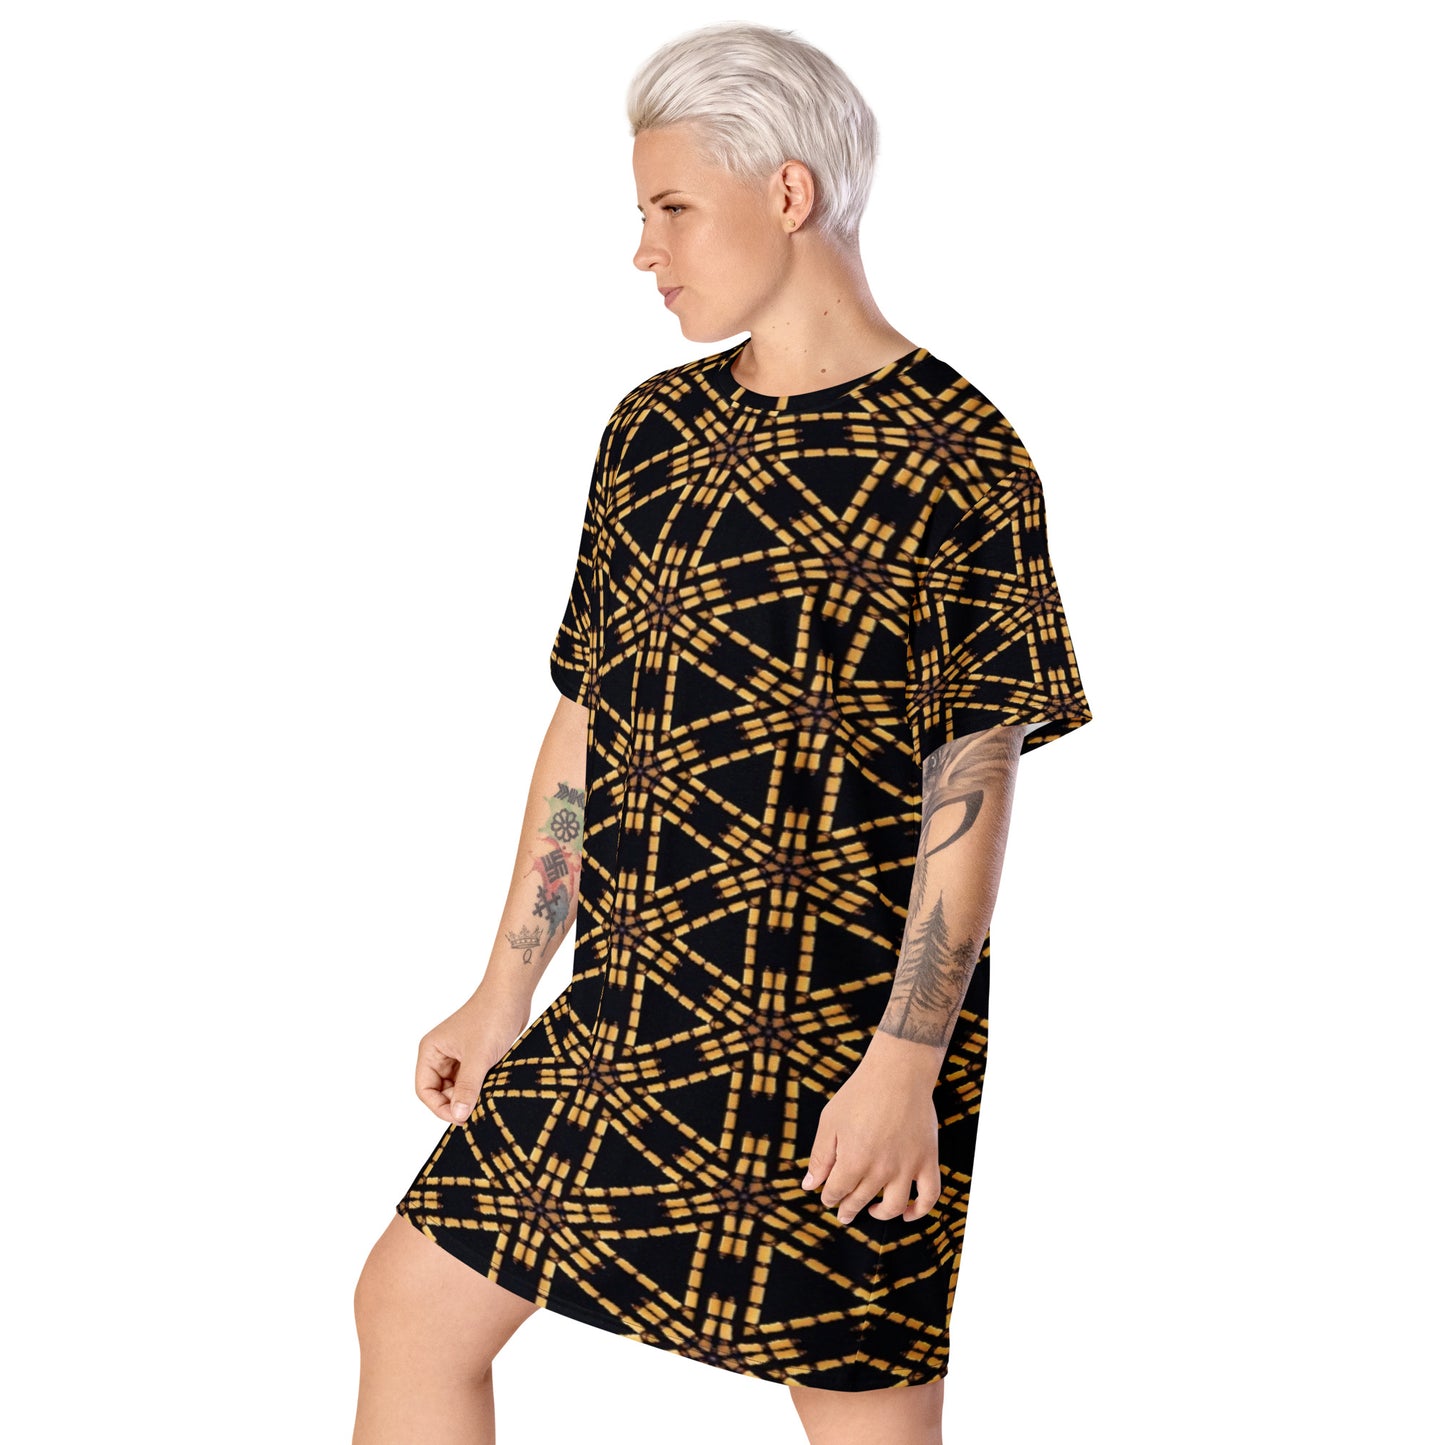 Abstract T-shirt Dress - O By Onica Online Store